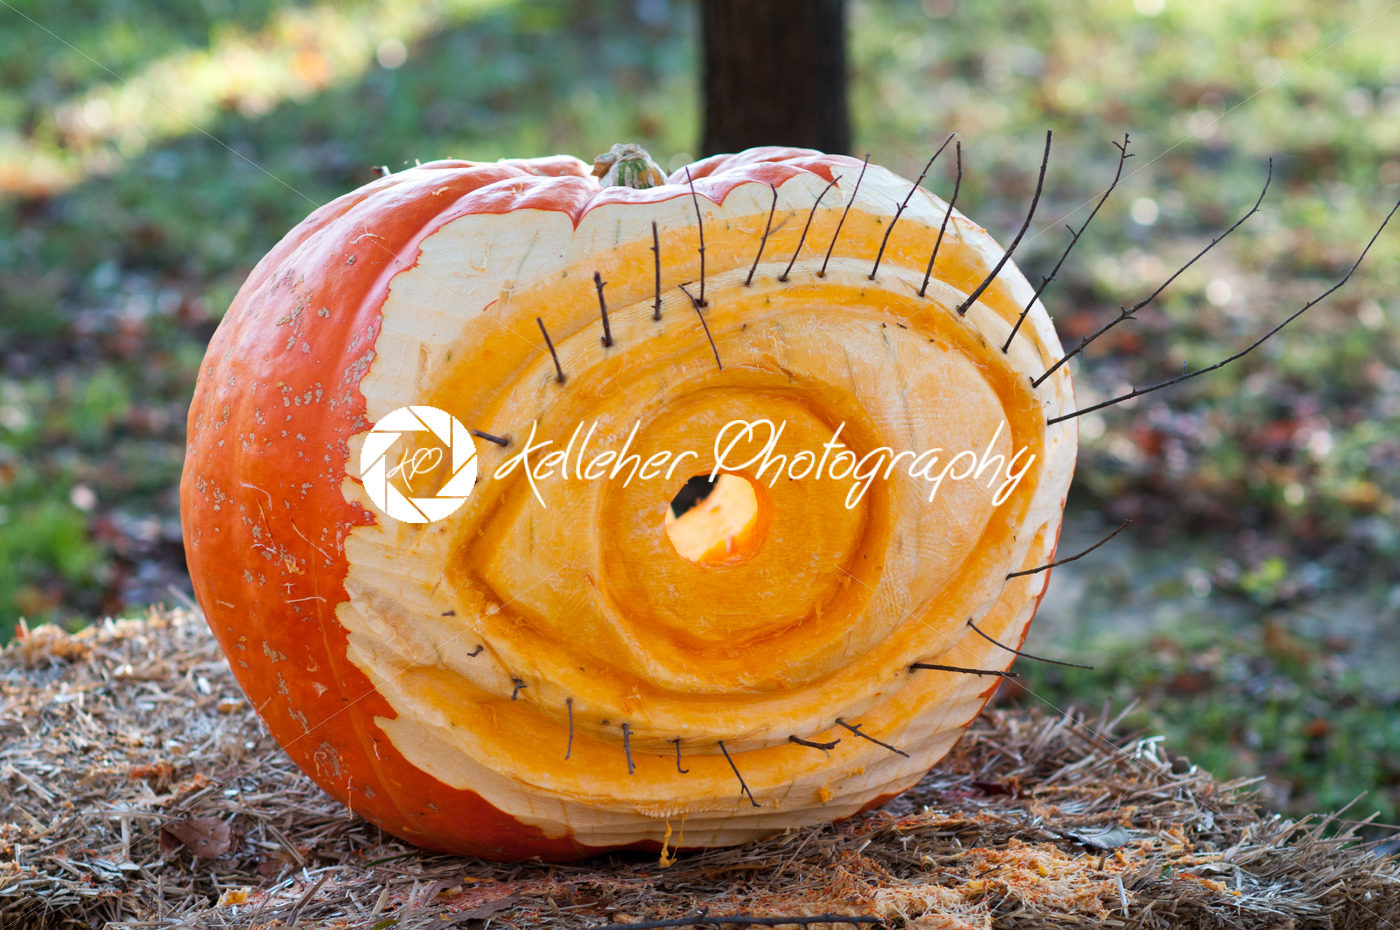 CHADDS FORD, PA – OCTOBER 26: Eye Pumpkin at The Great Pumpkin Carve carving contest on October 26, 2013 - Kelleher Photography Store